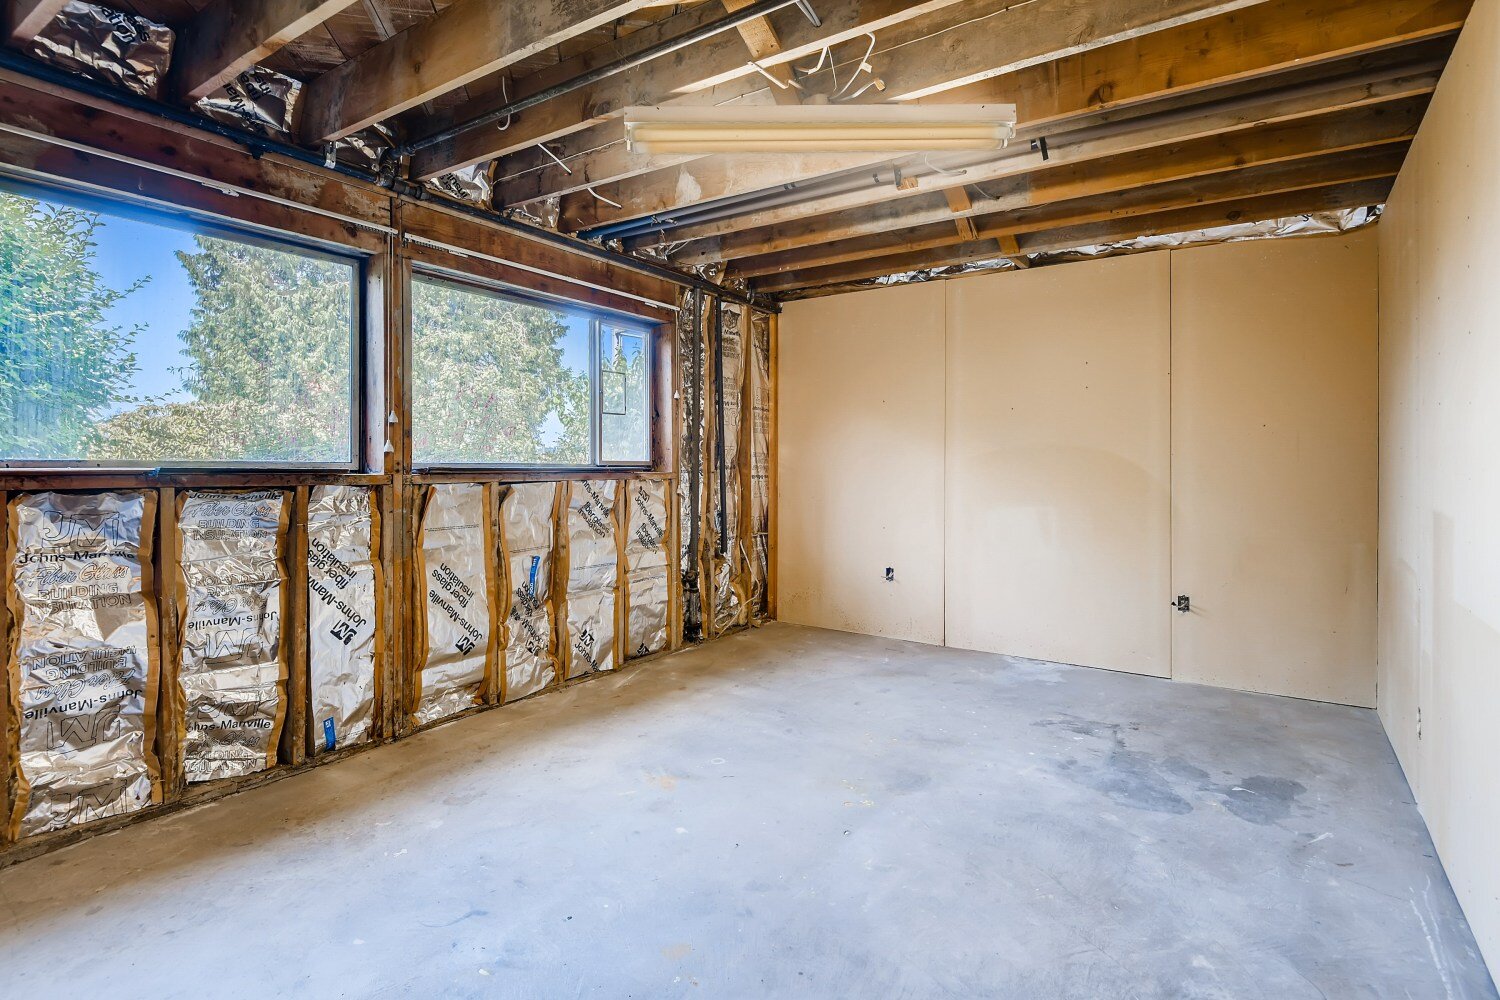 9064 Loyal Ave NW Seattle WA - Web Quality - 029 - 49 Lower Level Unfinished Room.jpg